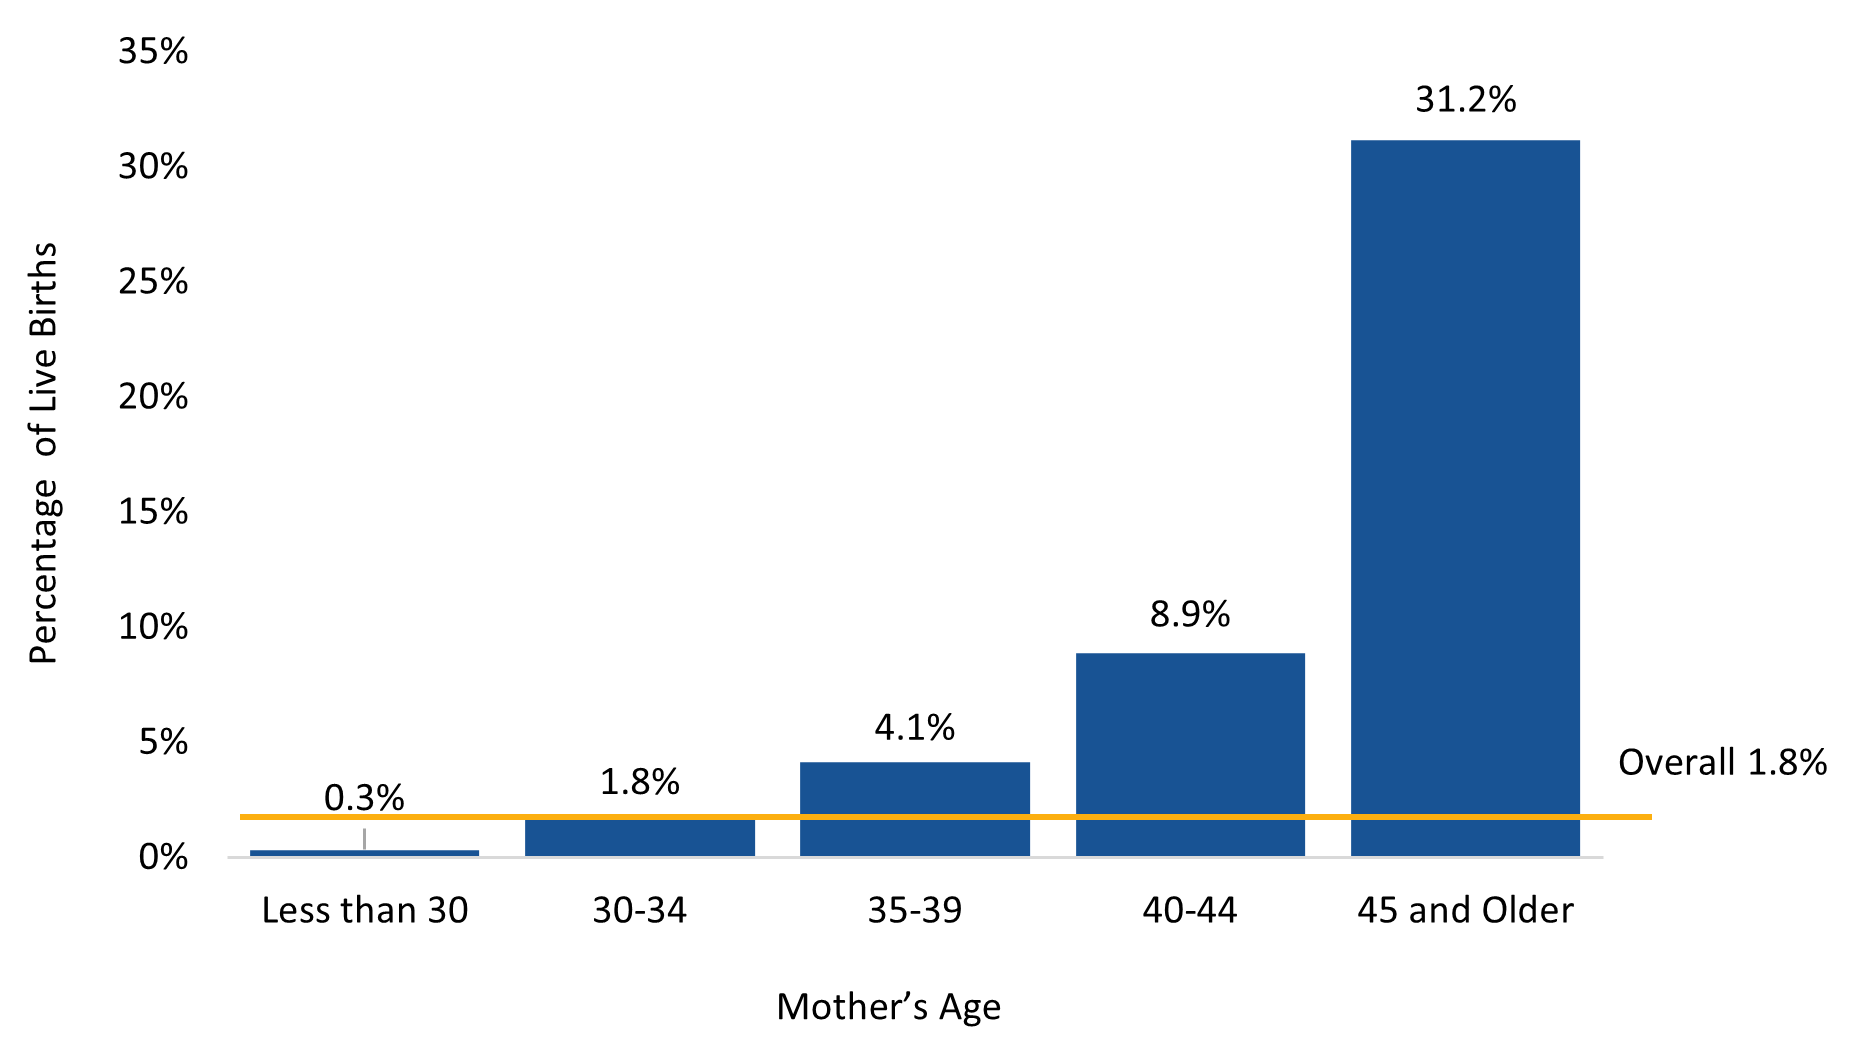 Figure 2: This figure displays a bar chart with the percentage of all live births conceived through the use of assistive reproductive technology (ART) by mother’s age.  The overall percentage of live births with ART is 1.8%.  Among mothers less than 30 years old, 0.3% of live births involve the use ART.  Mother’s age categories 30-34, 35-39, 40-44, and 45 and older correspond to 1.8%, 4.1%, 8.9%, and 31.2% of live births involving ART respectively.